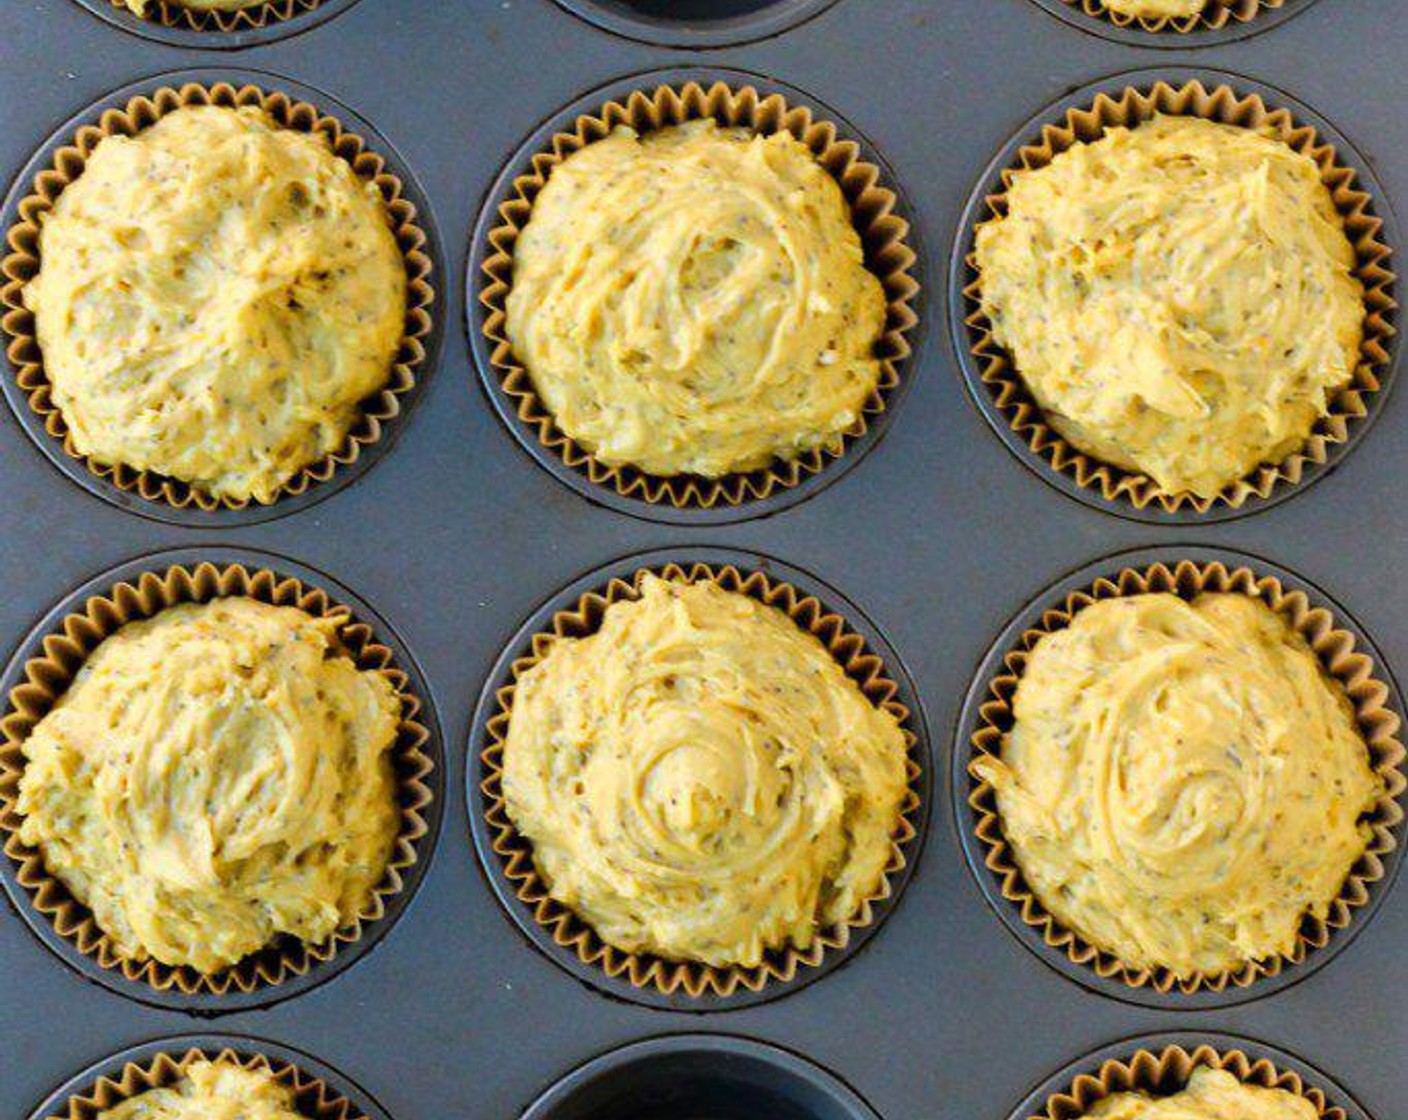 step 6 Fold dry ingredients into wet ingredients until well combined and portion evenly to fill 10 muffin cups. Bake for 15 minutes, remove from oven and place muffins on a cooling rack.